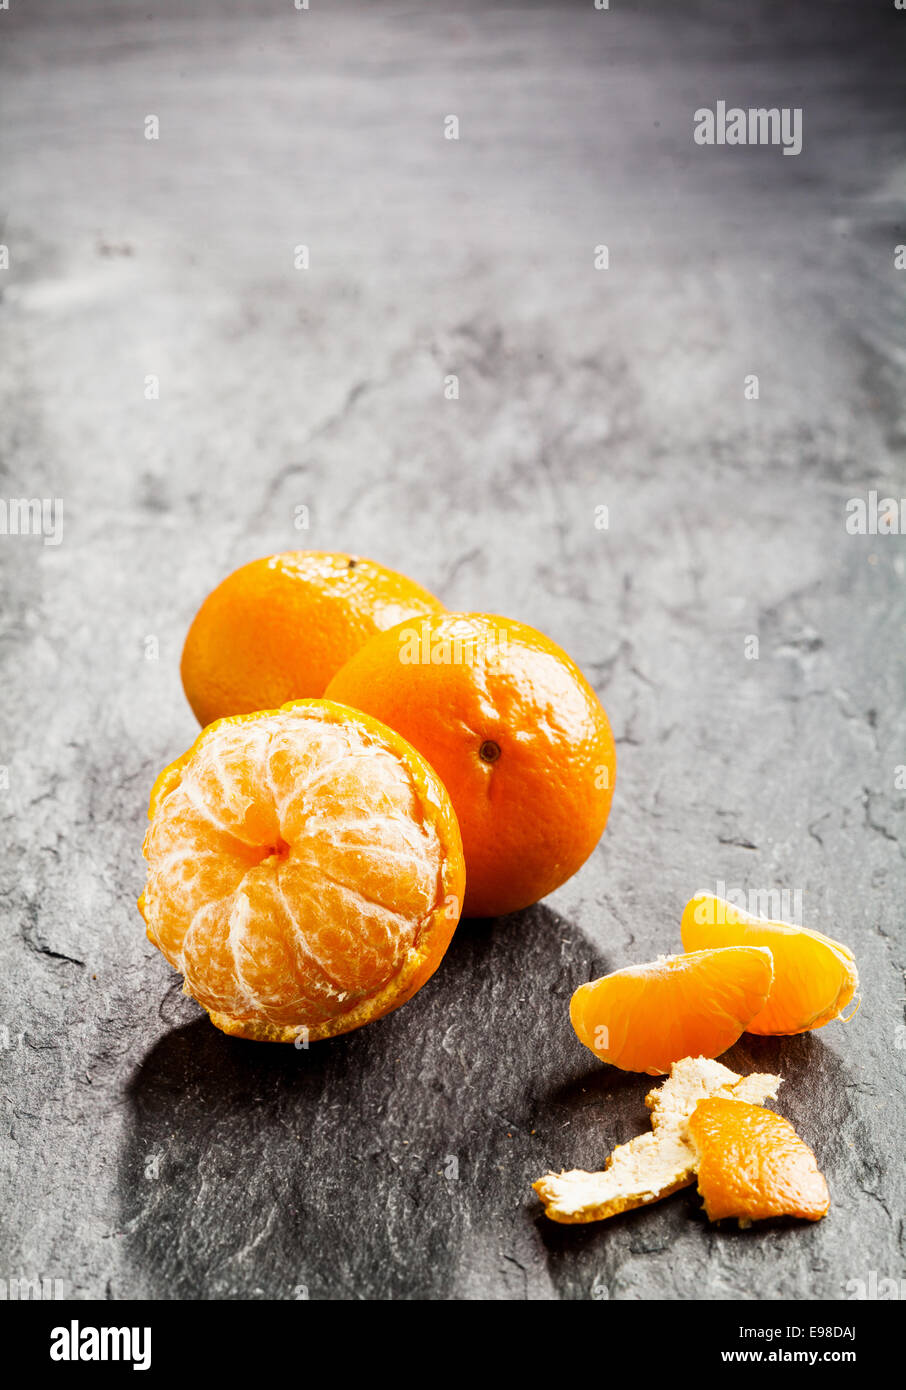 Peeled fresh sweet nectarine, tangerine or clementine with scattered loose  peel and segments on a dark background with copyspace Stock Photo - Alamy